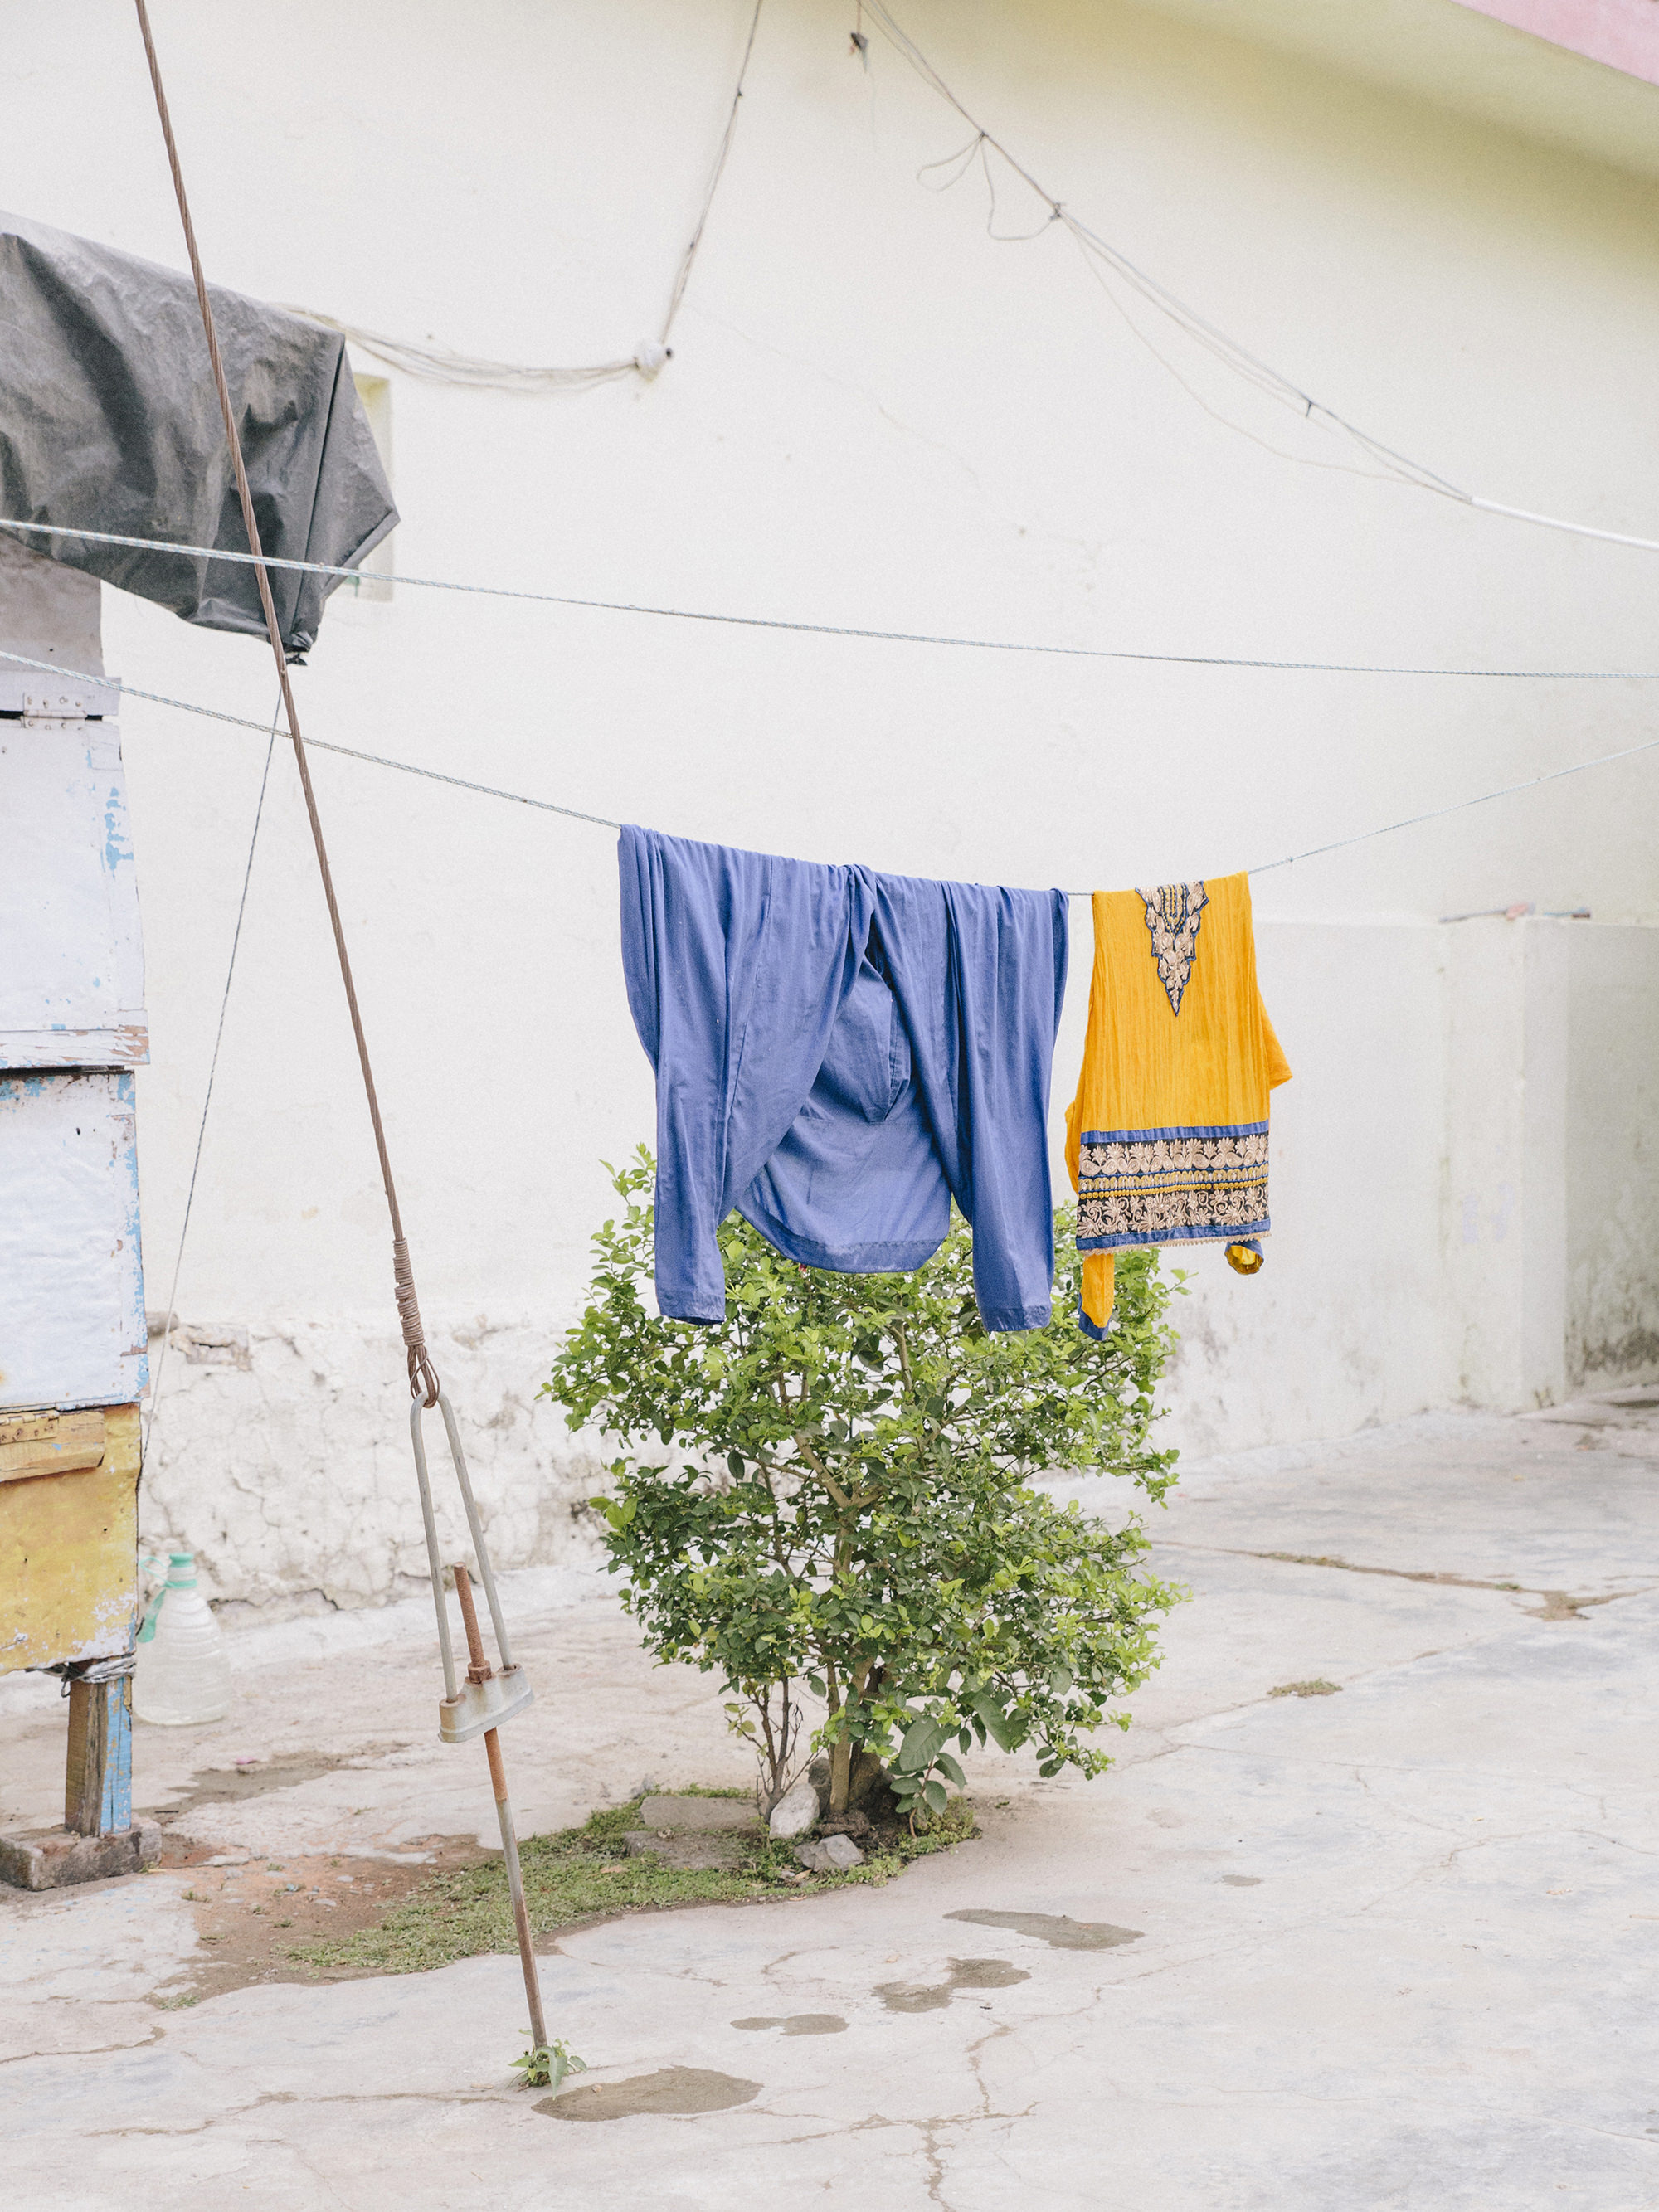 Drying clothes after holy dip, Rishikesh, India. 2017.